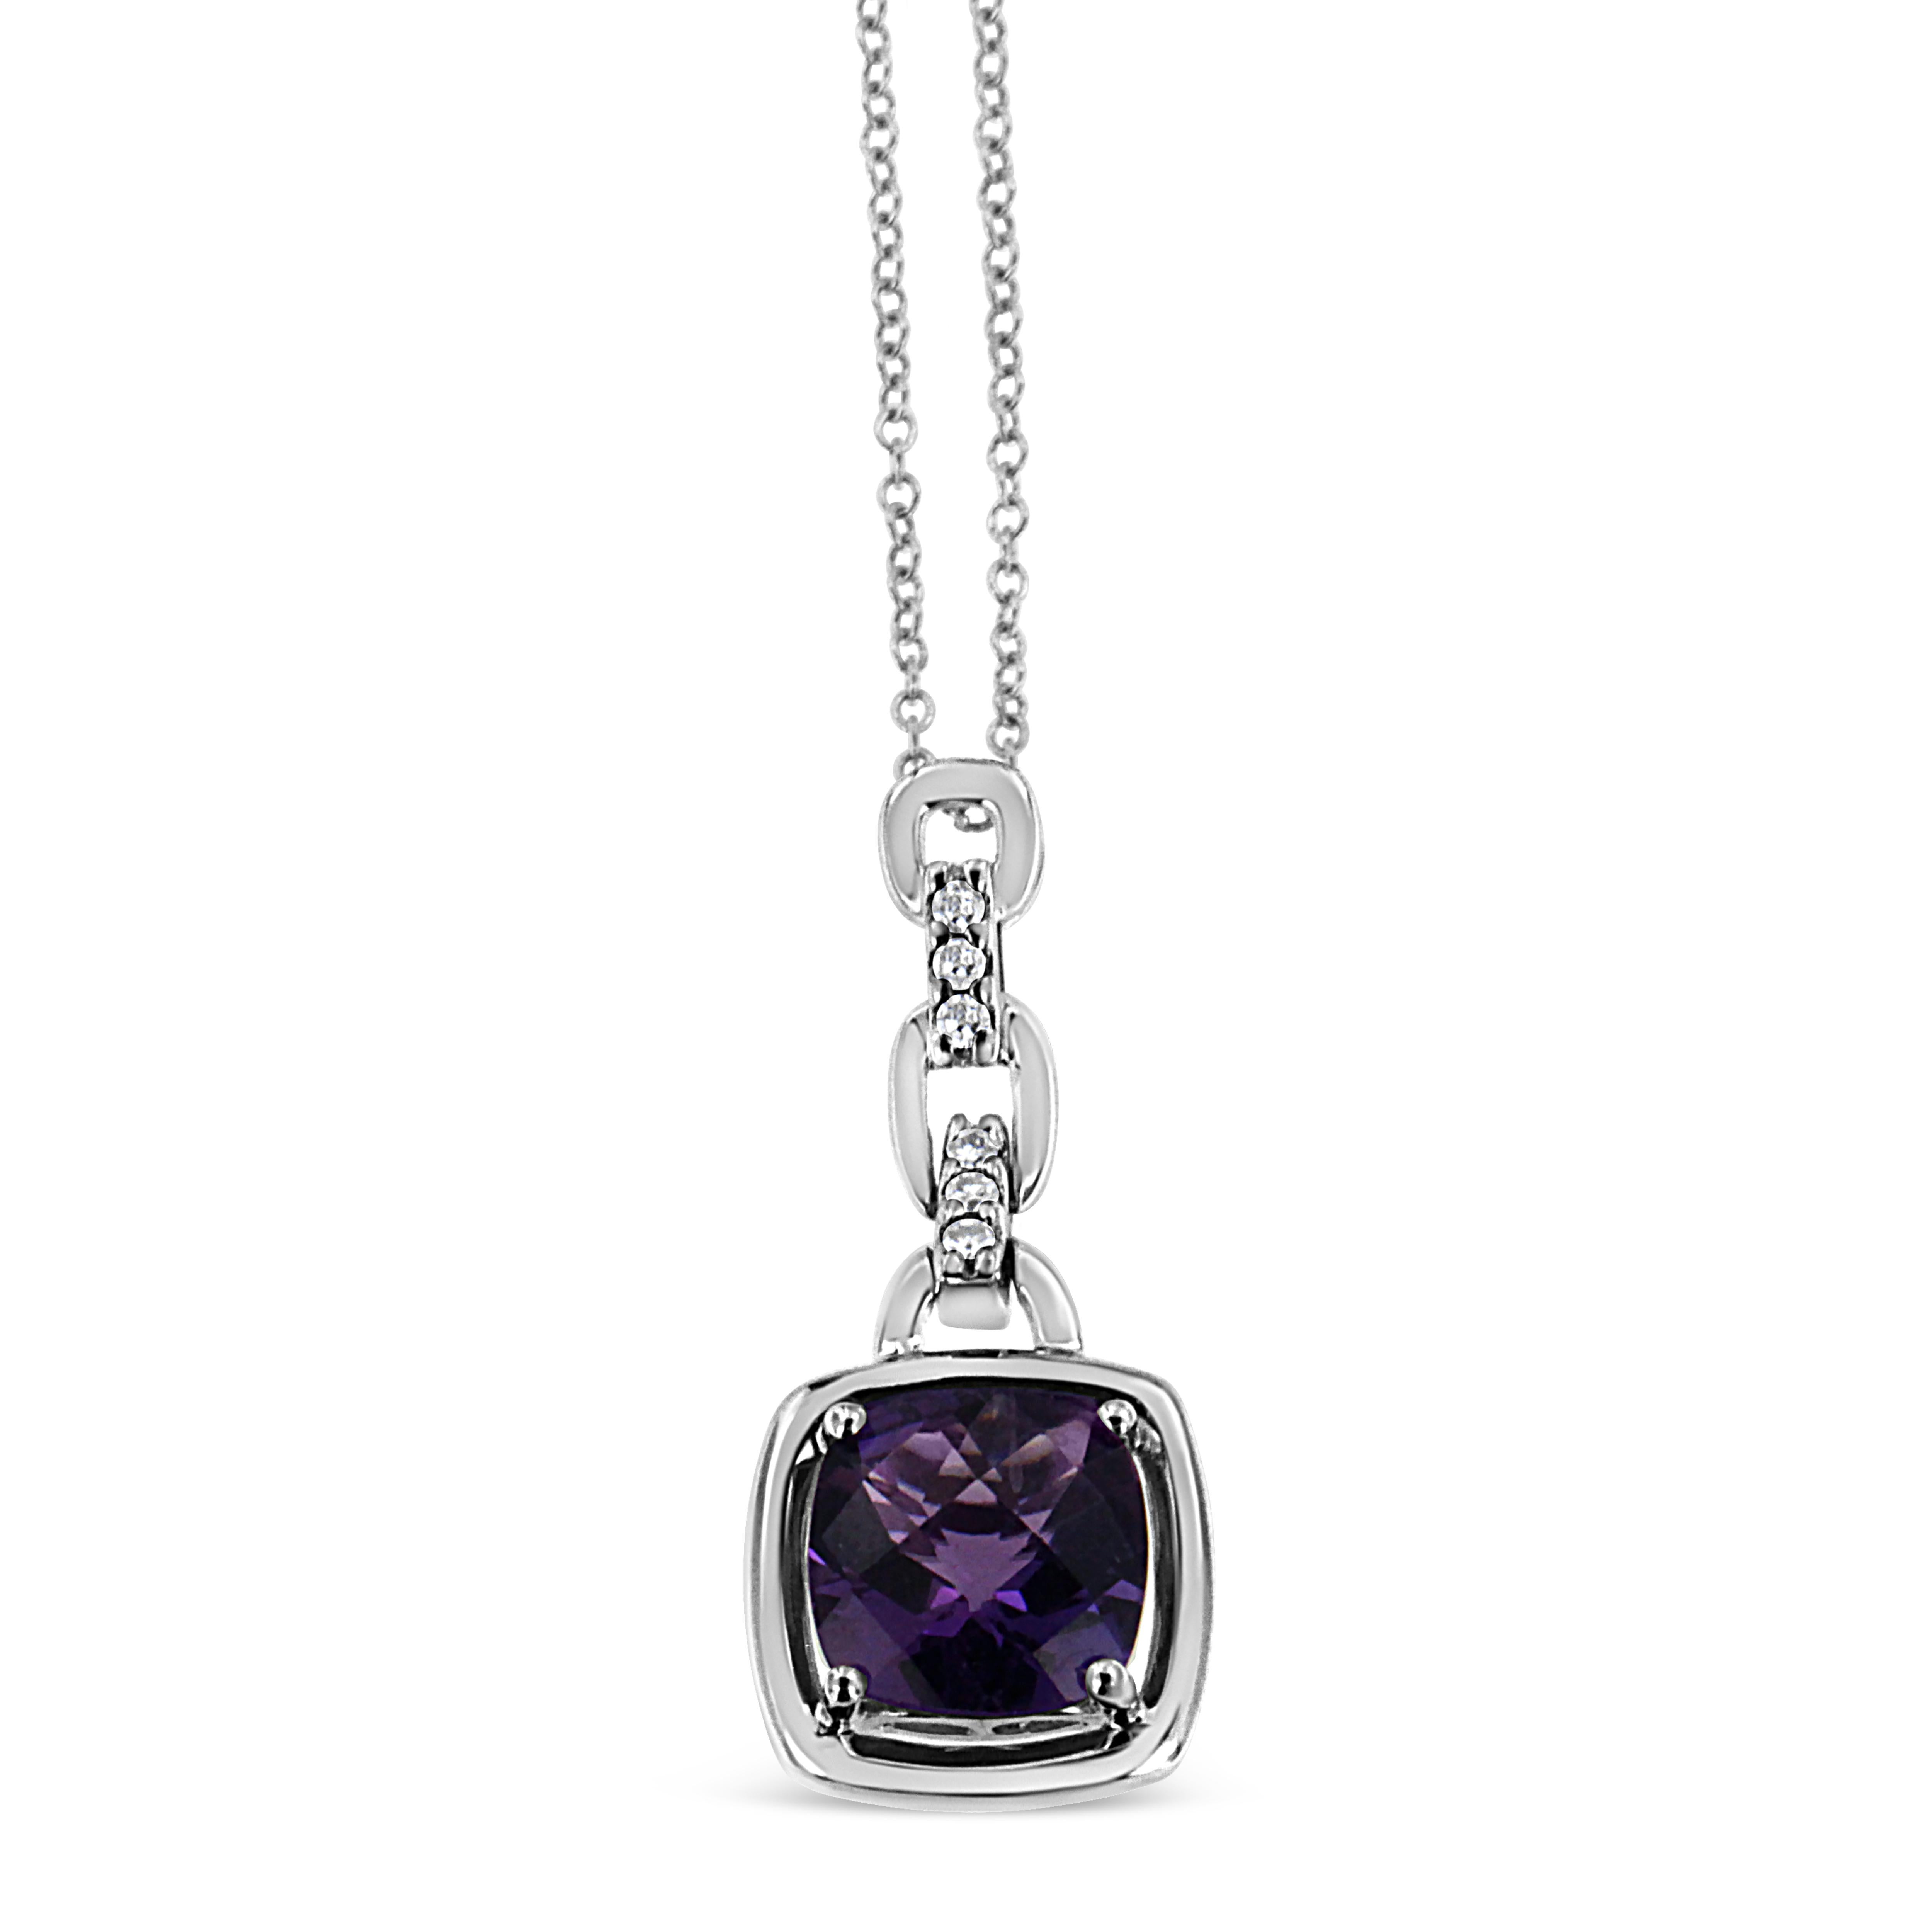 This glamorous pendant made from .925 sterling silver will be unlike any other piece you own. Embellished in an elegant prong setting, a single 6x6MM cushion shaped natural purple amethyst dangles from an interlocking silver chain. Round-cut white